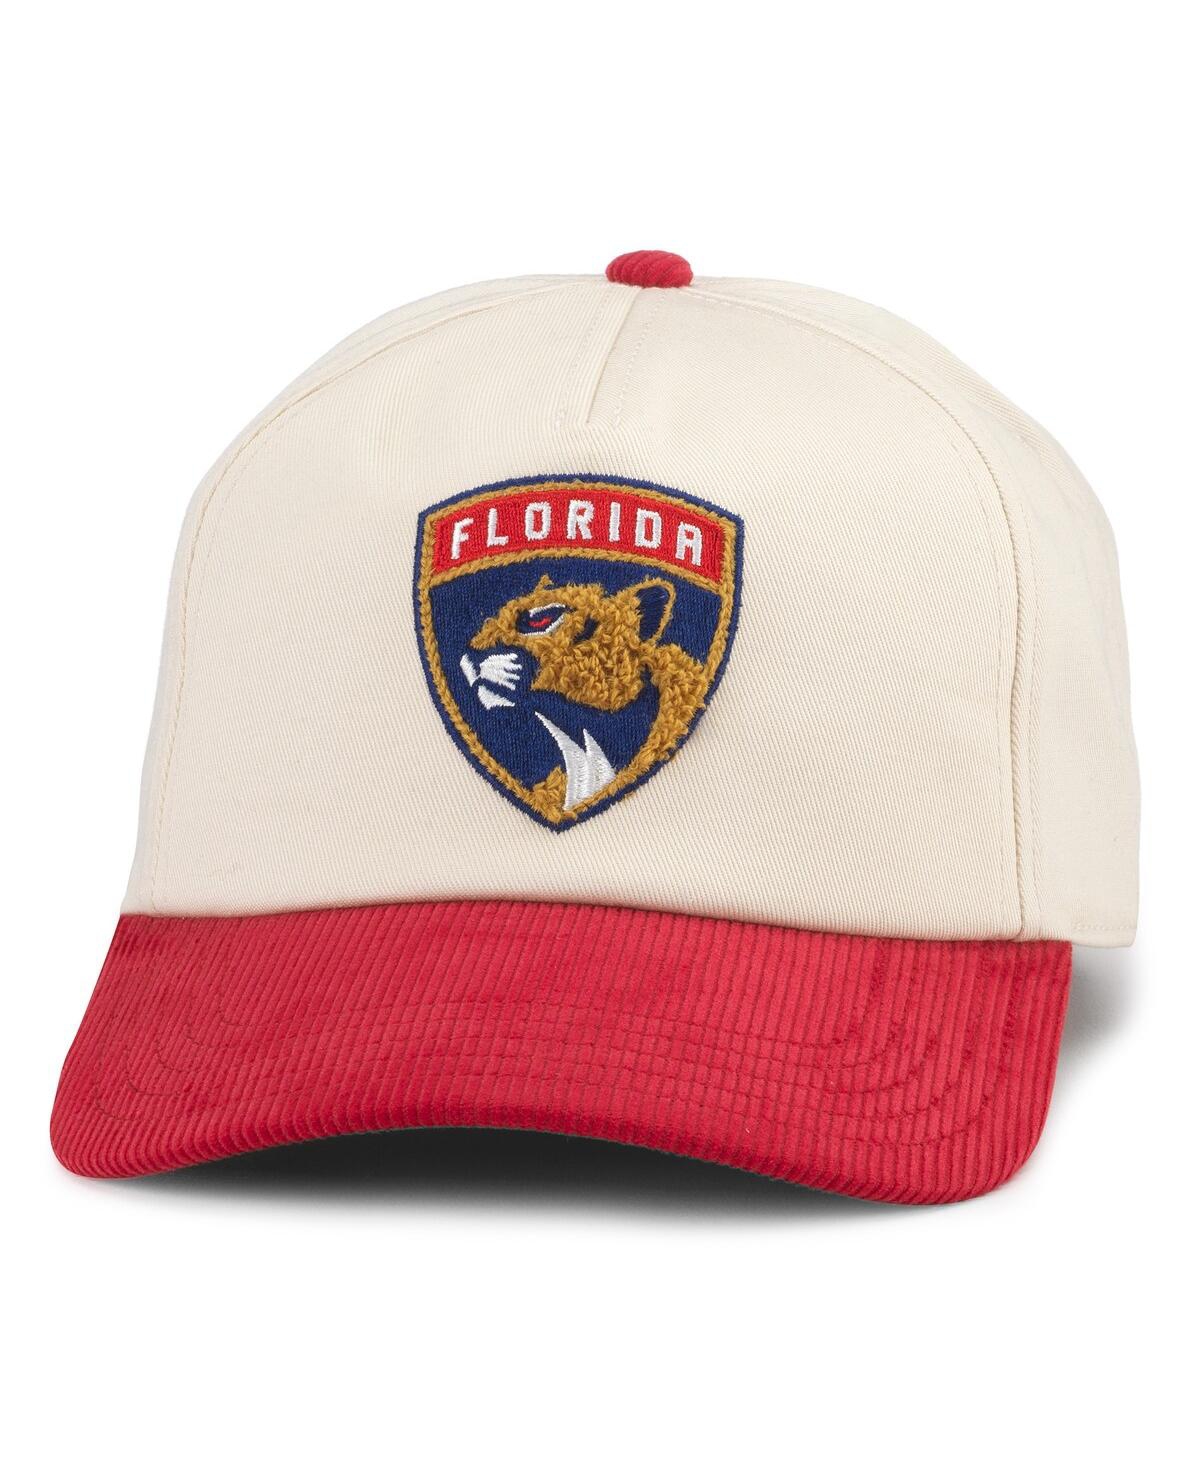 Men's American Needle White, Red Florida Panthers Burnett Adjustable Hat - White, Red